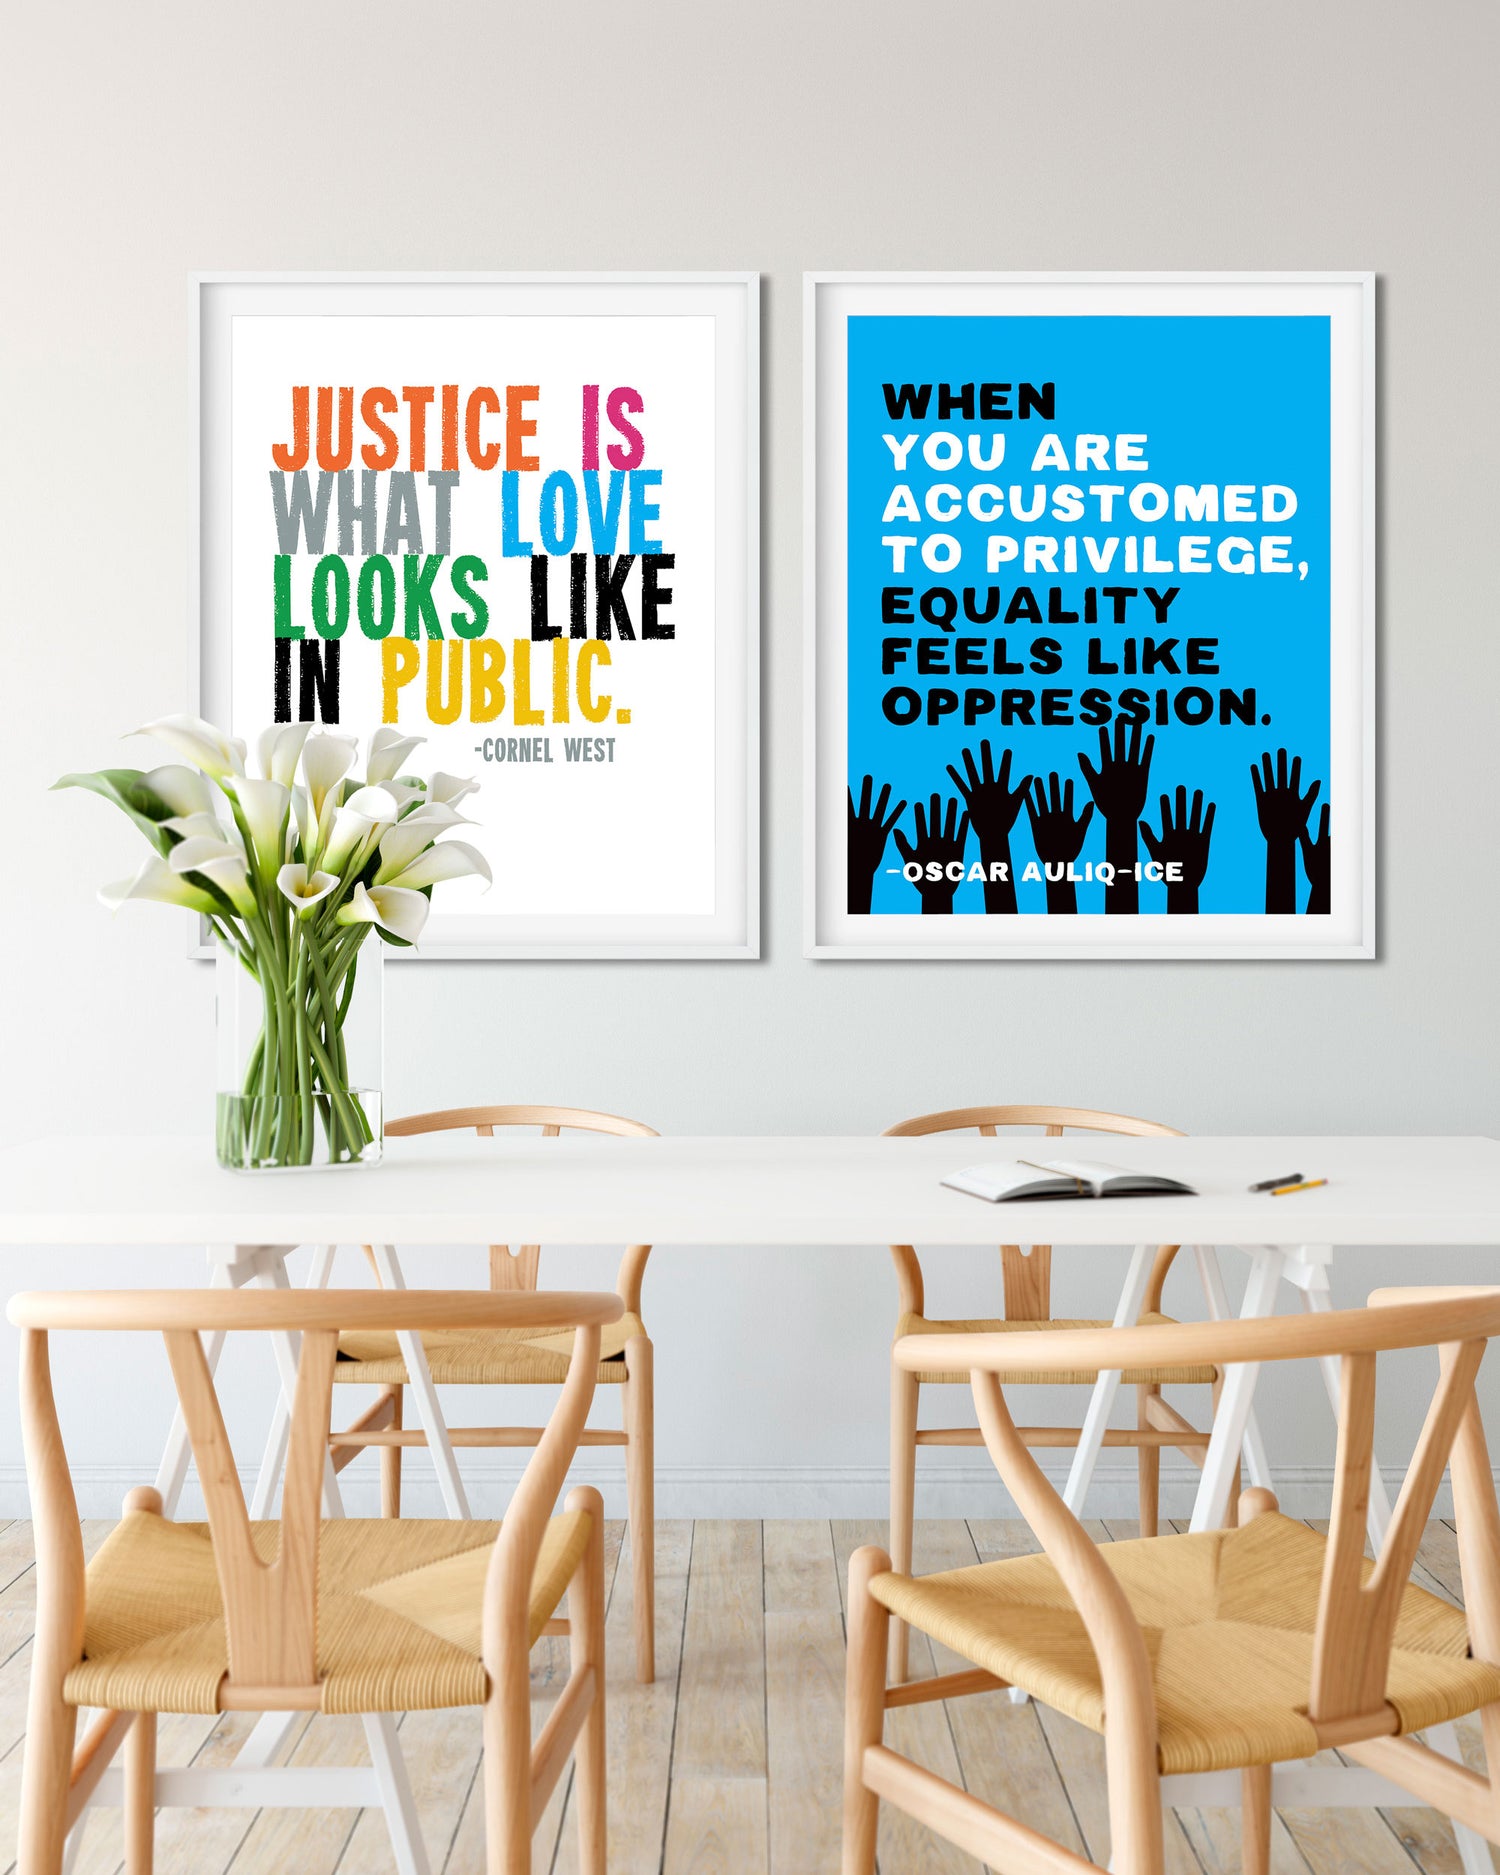 Protest Posters, Demonstration Posters, Social Justice Posters from Transit Design